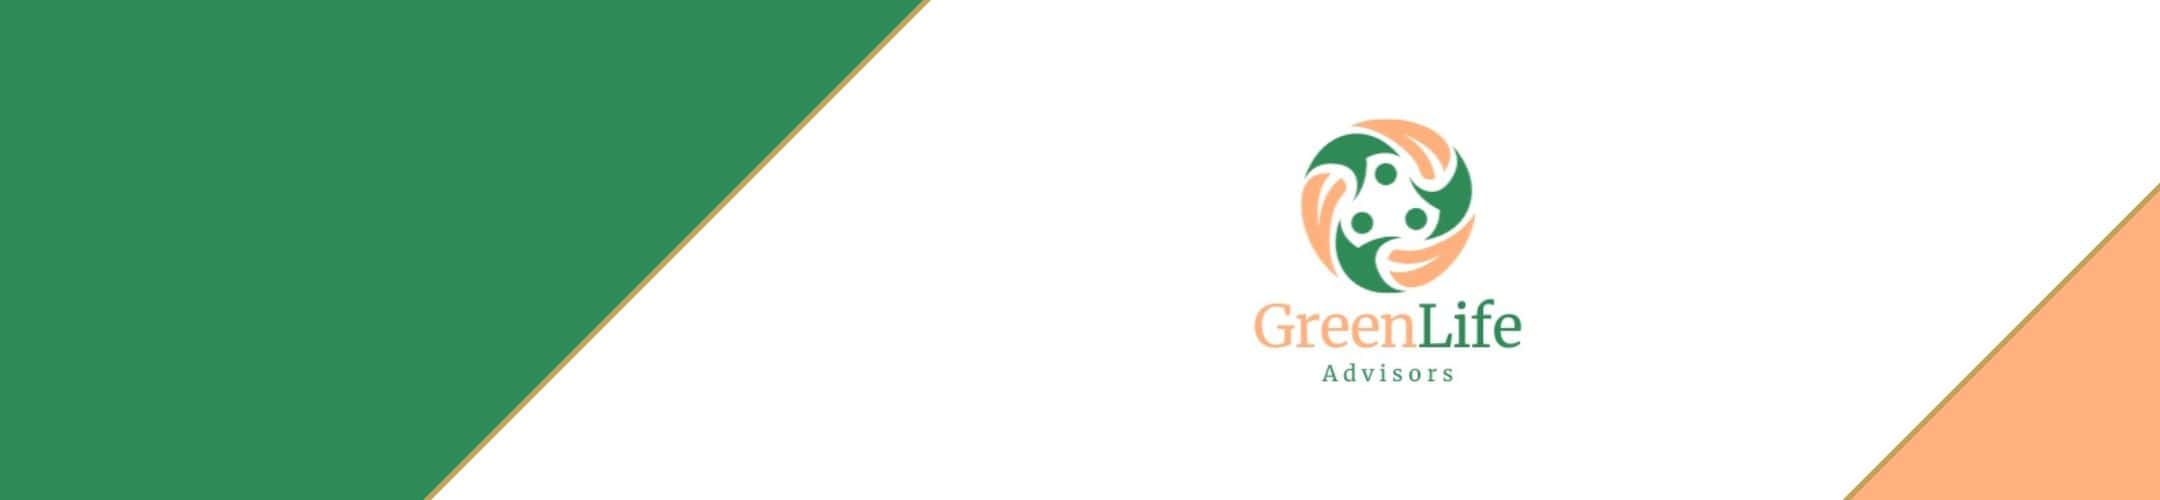 Green life advisors logo displayed on a minimalist background with a green and white color scheme, symbolizing eco-friendly and sustainable financial guidance.